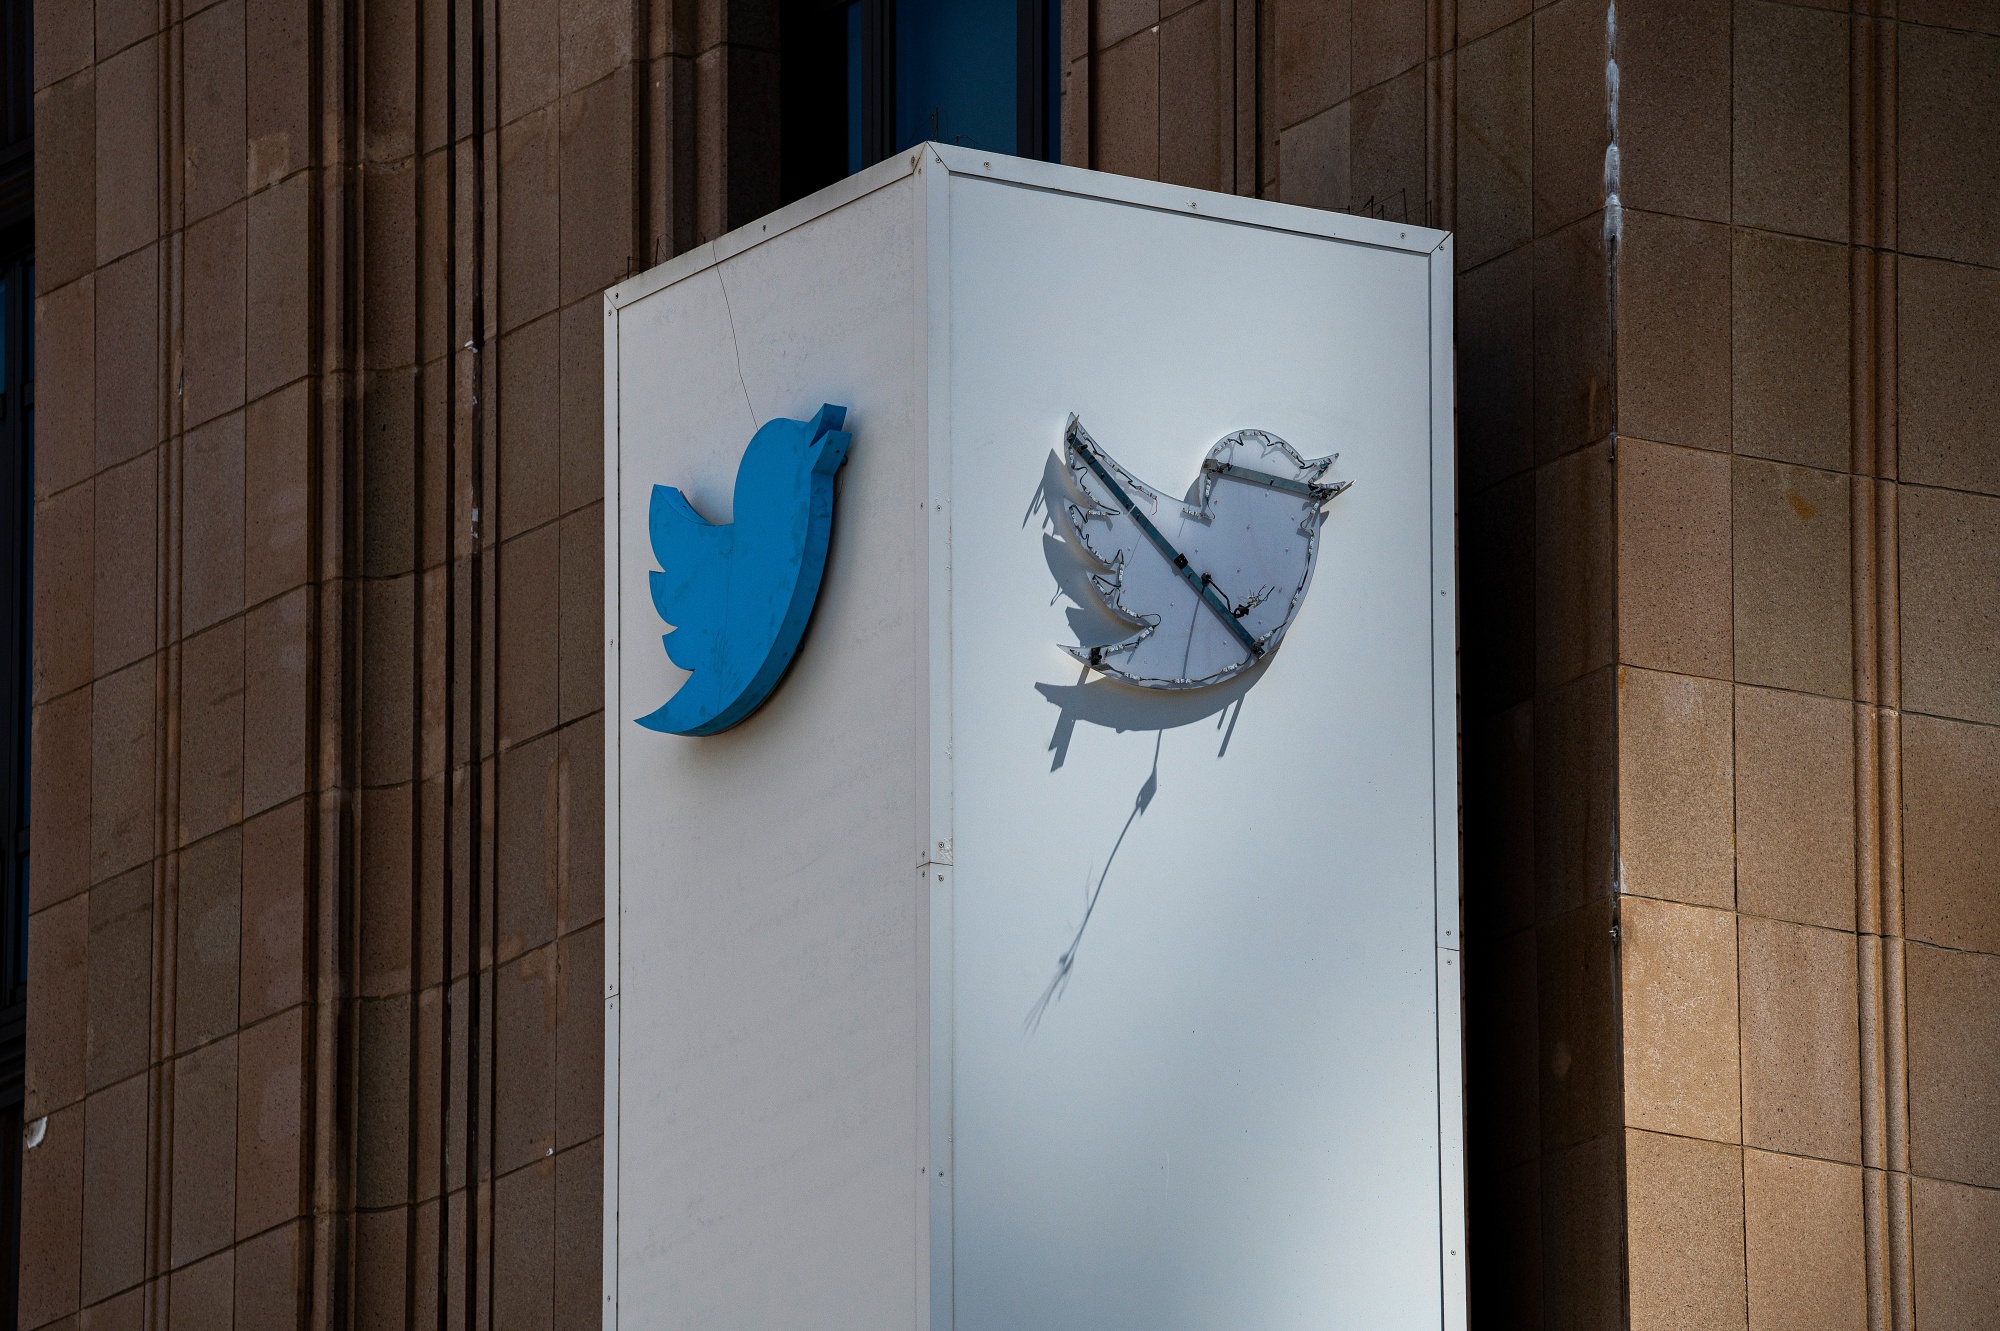 Twitter announces Globe as the first advertising partner in Asia